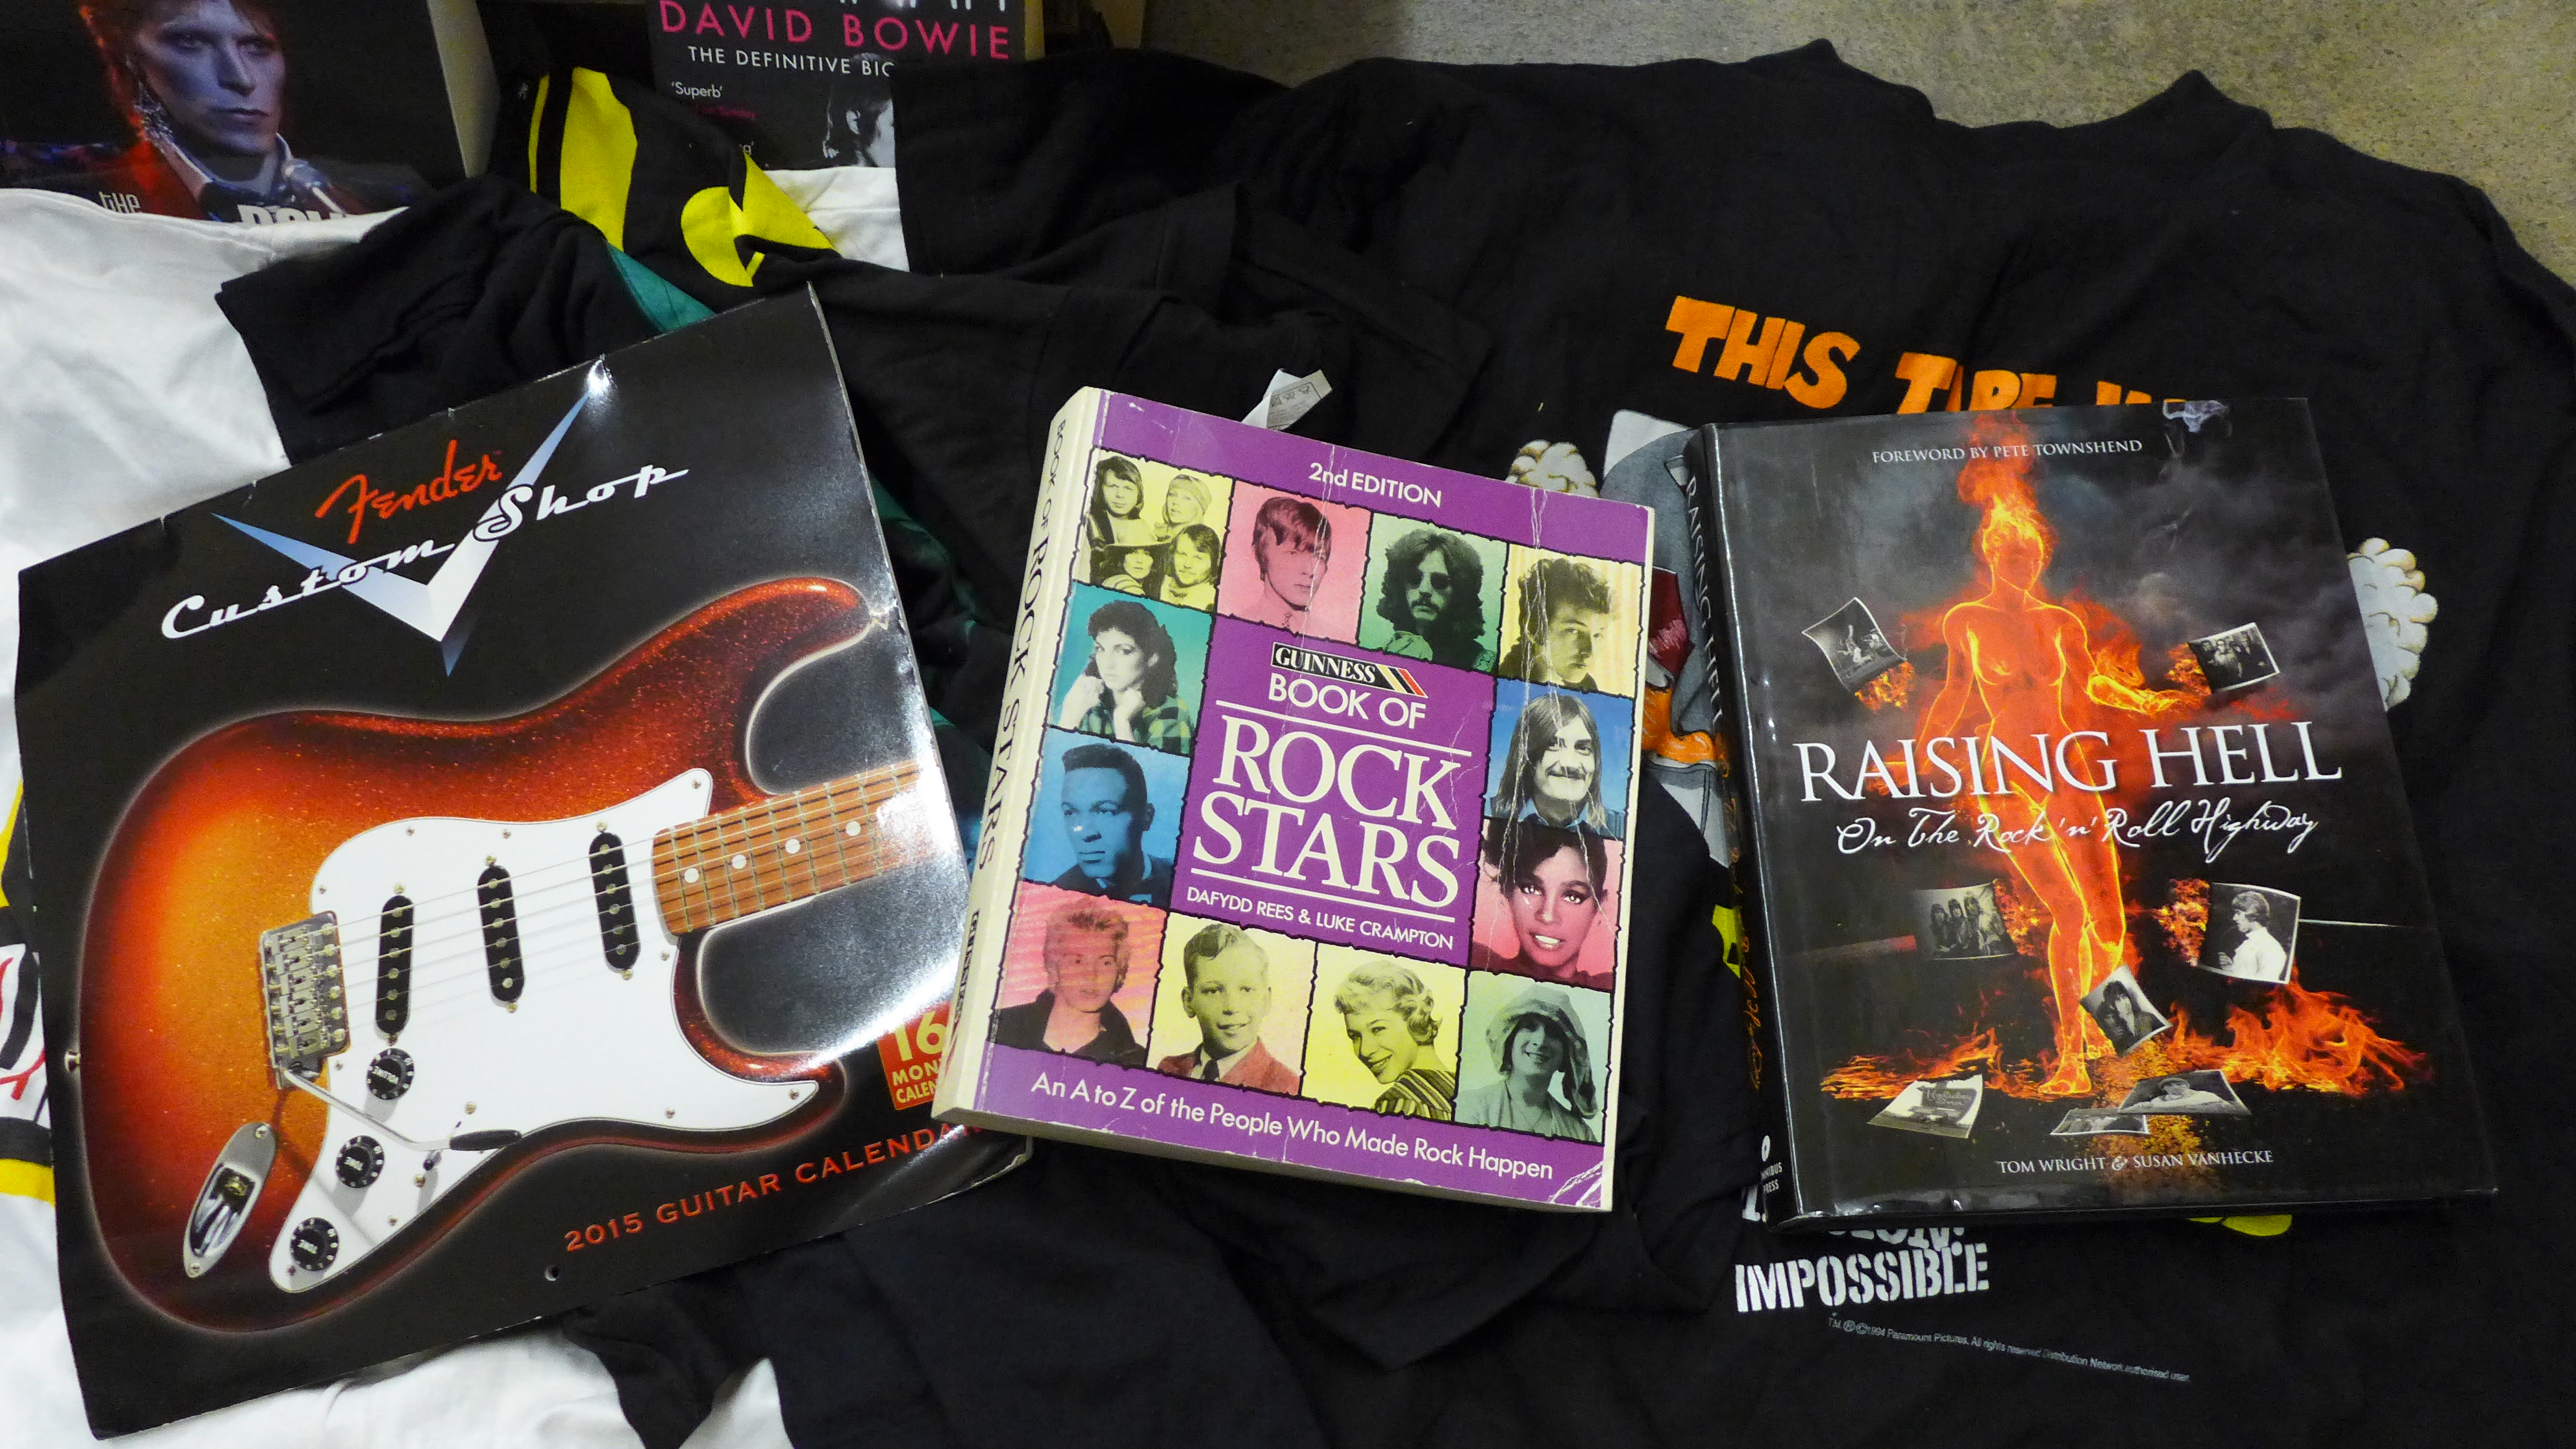 Music related T-shirts, rock music books and two David Bowie books - Image 4 of 5